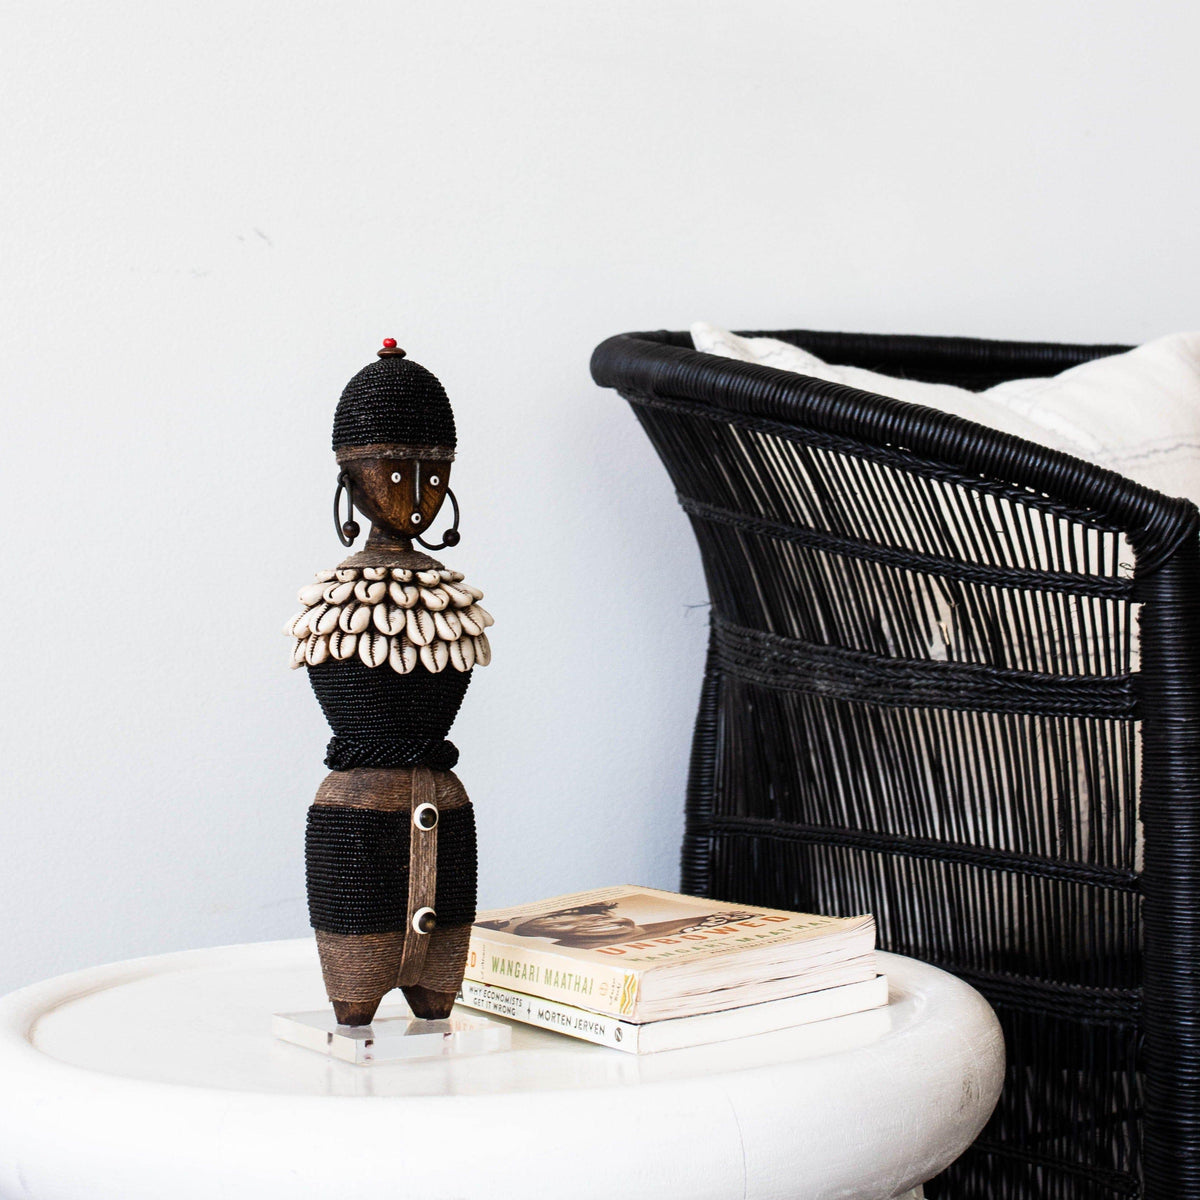 Black Namji Dolls kanju interiors Cameroon rounded geometric form beaded necklace cowrie shell decoration decorative decor table top shelf decor historical traditional tribal cultural gift fashionable style unique one of a kind colorful sizes hard wood glass beads statue